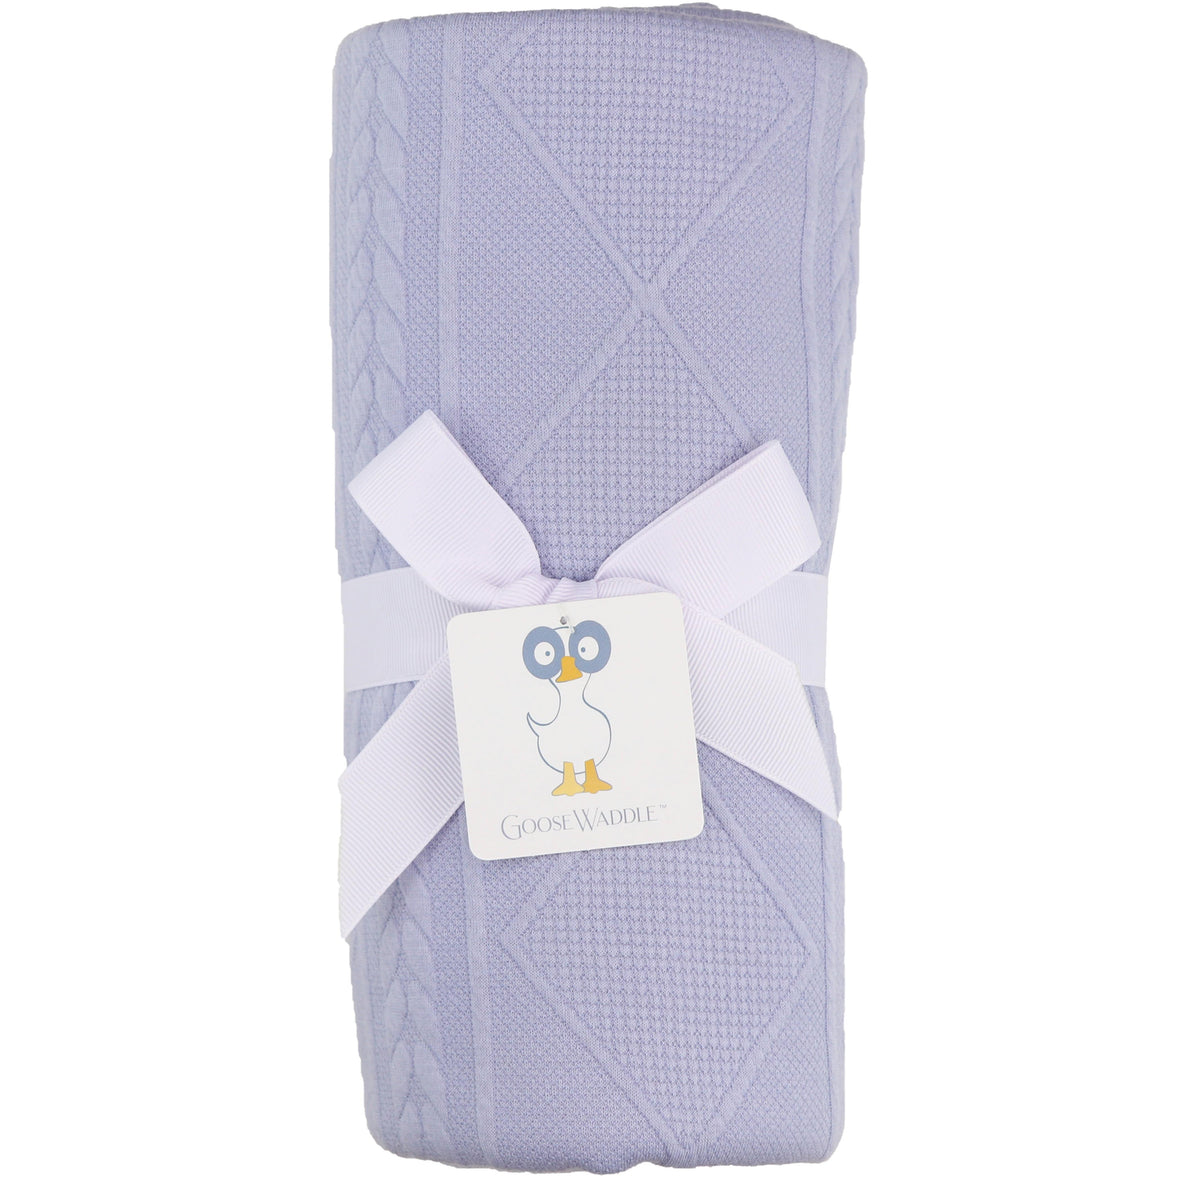 GooseWaddle Lavender Knit Baby Blankets